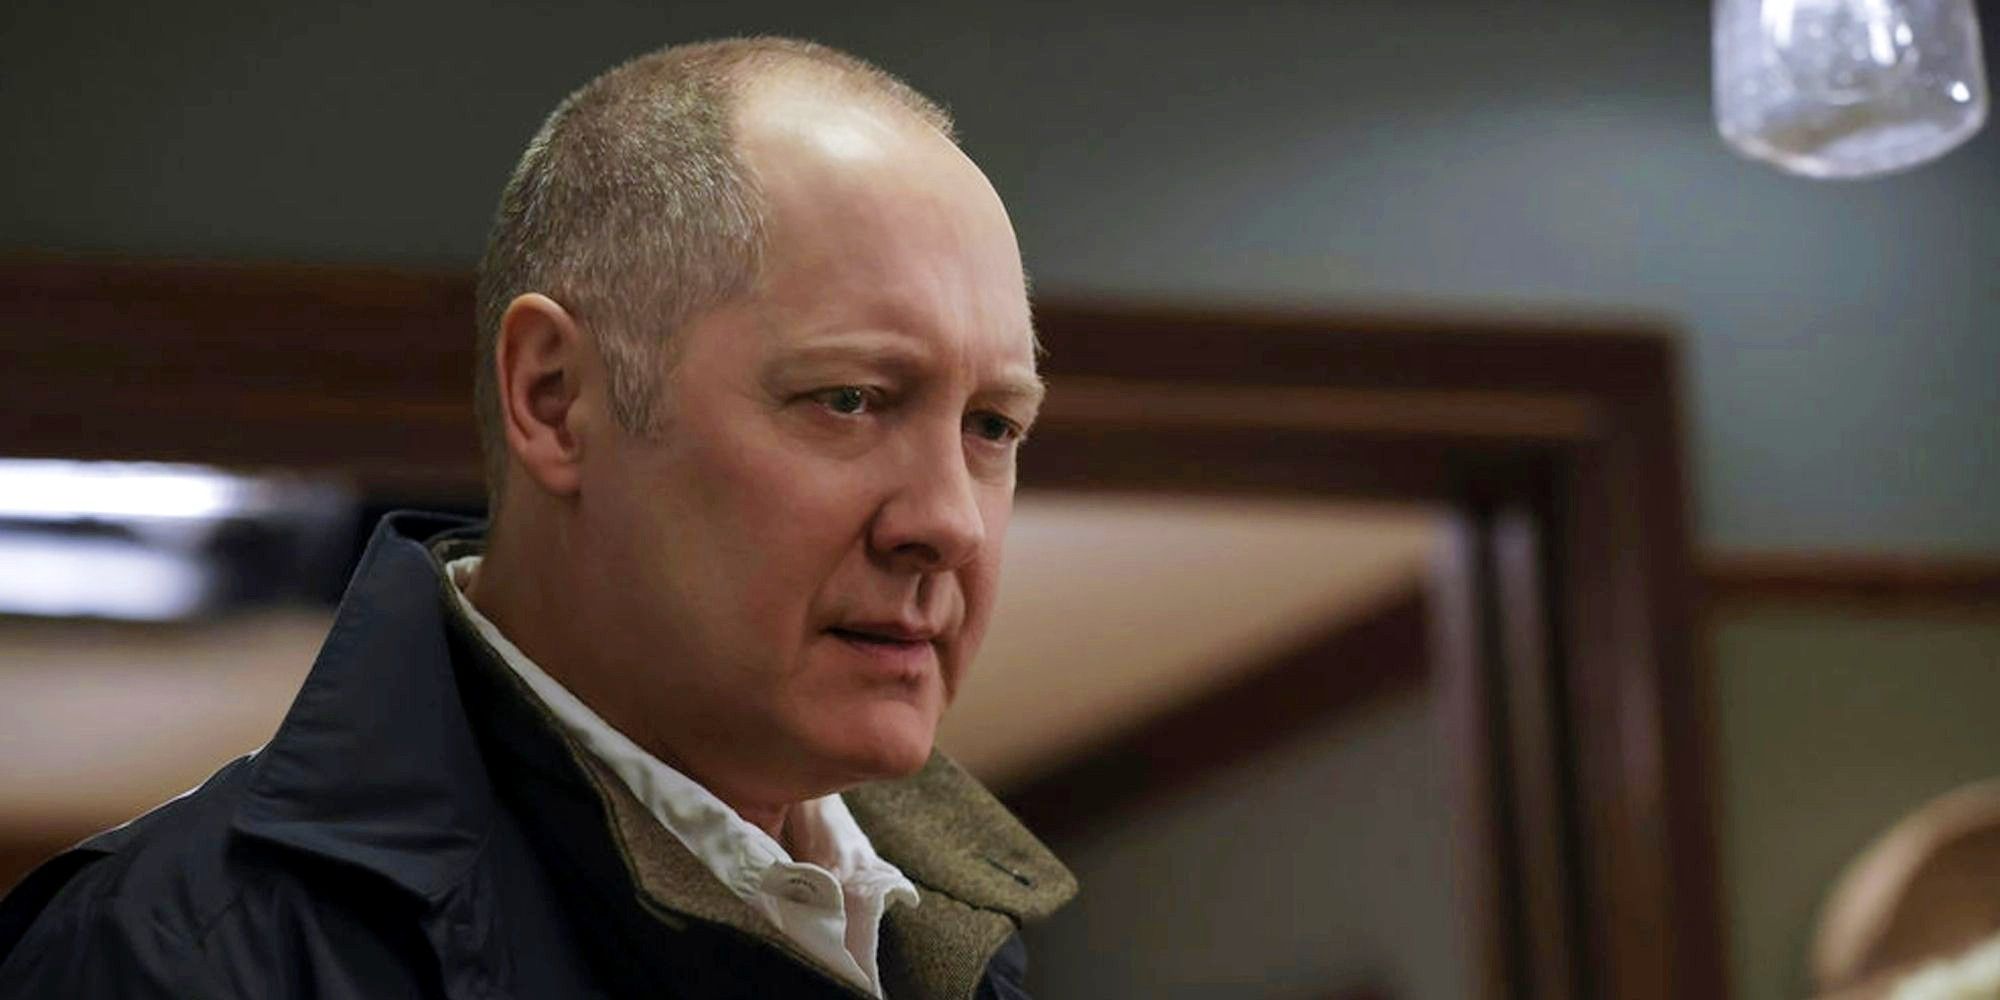 James Spader as Red in The Blacklist looking serious